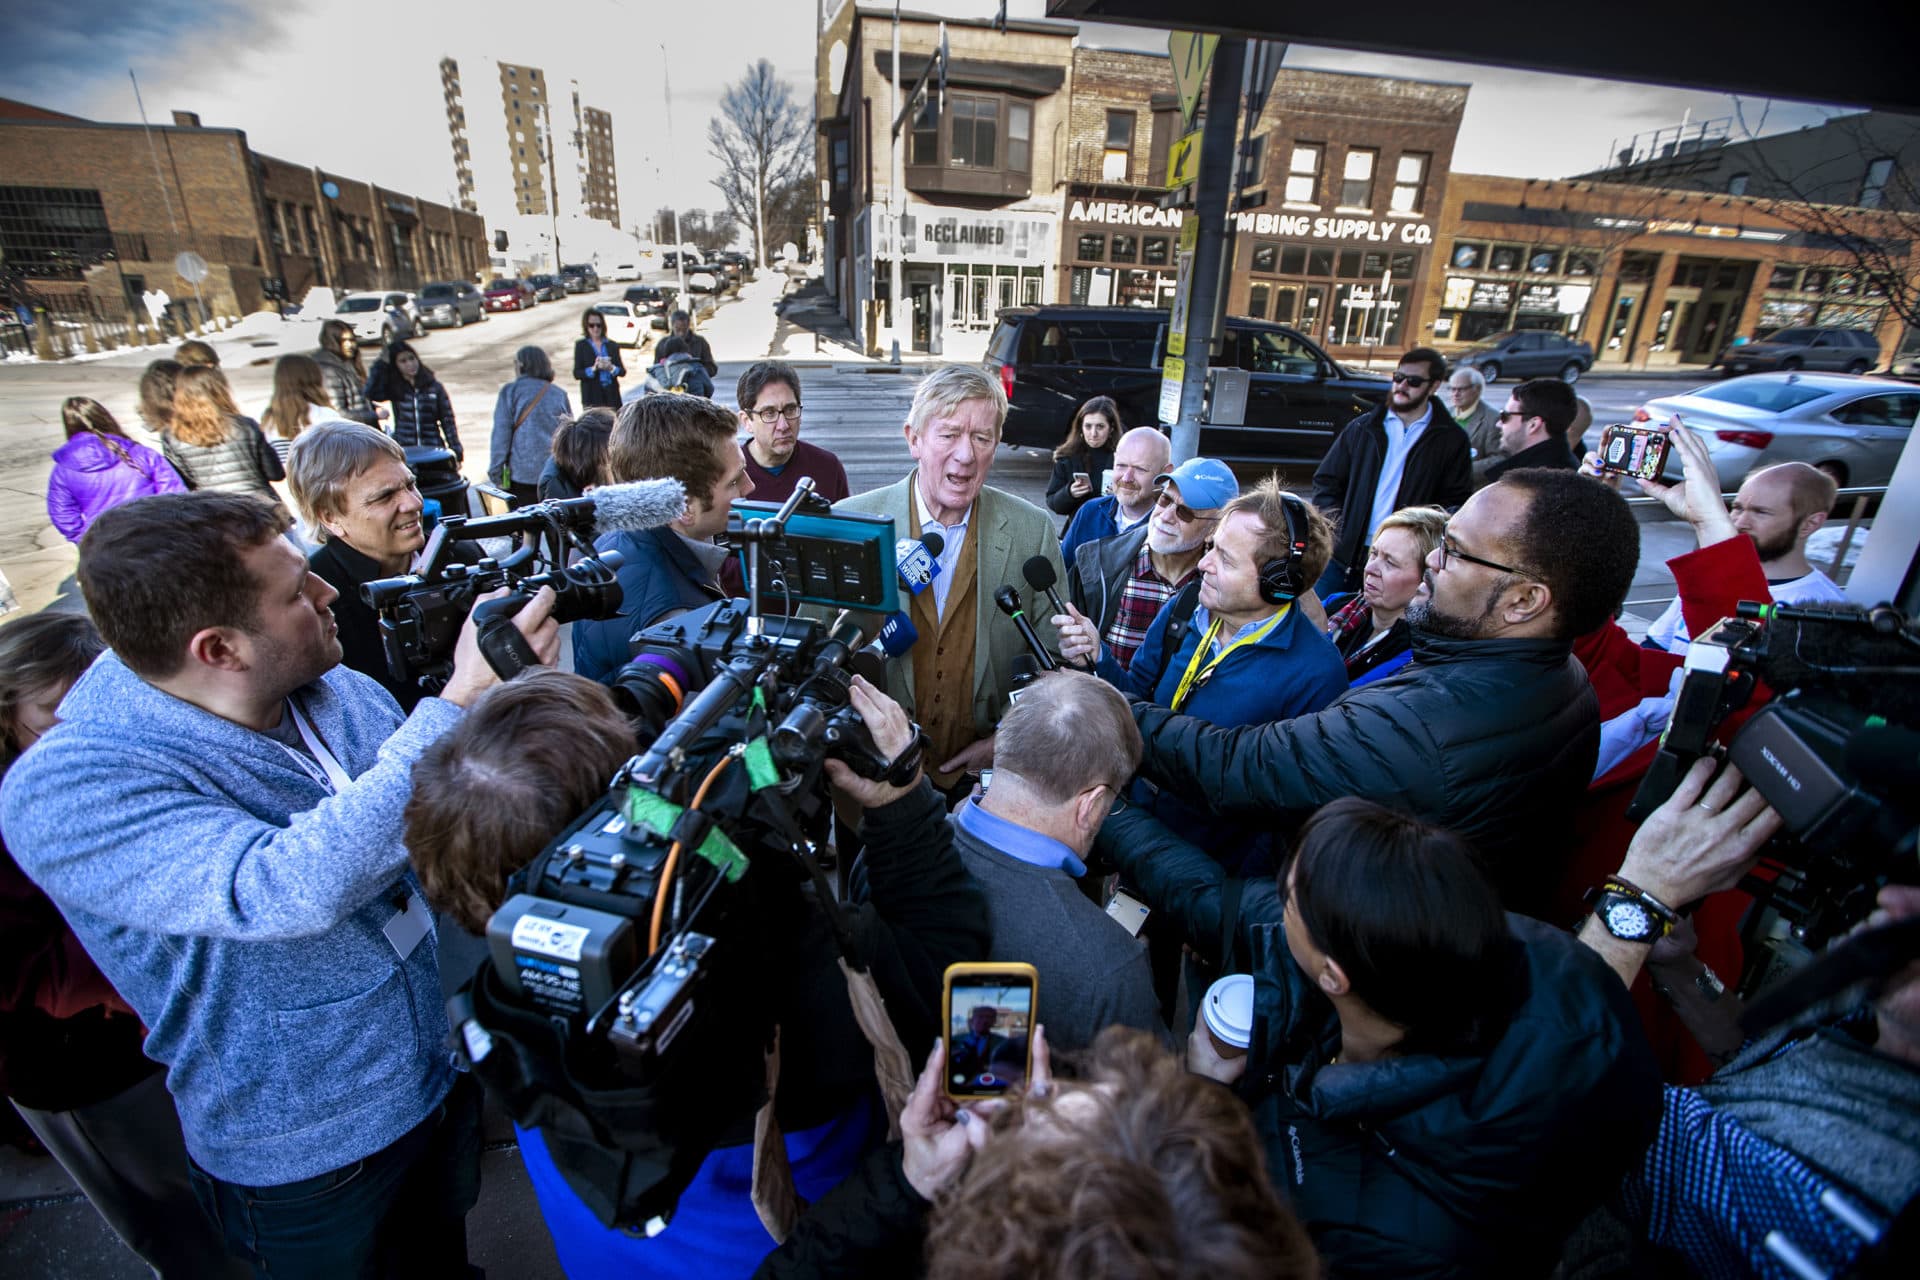 Republican presidential candidate and former Massachusetts Gov. William Weld speaks with press during a campaign stop on East Grand Avenue in Des Moines. (Jesse Costa/WBUR)